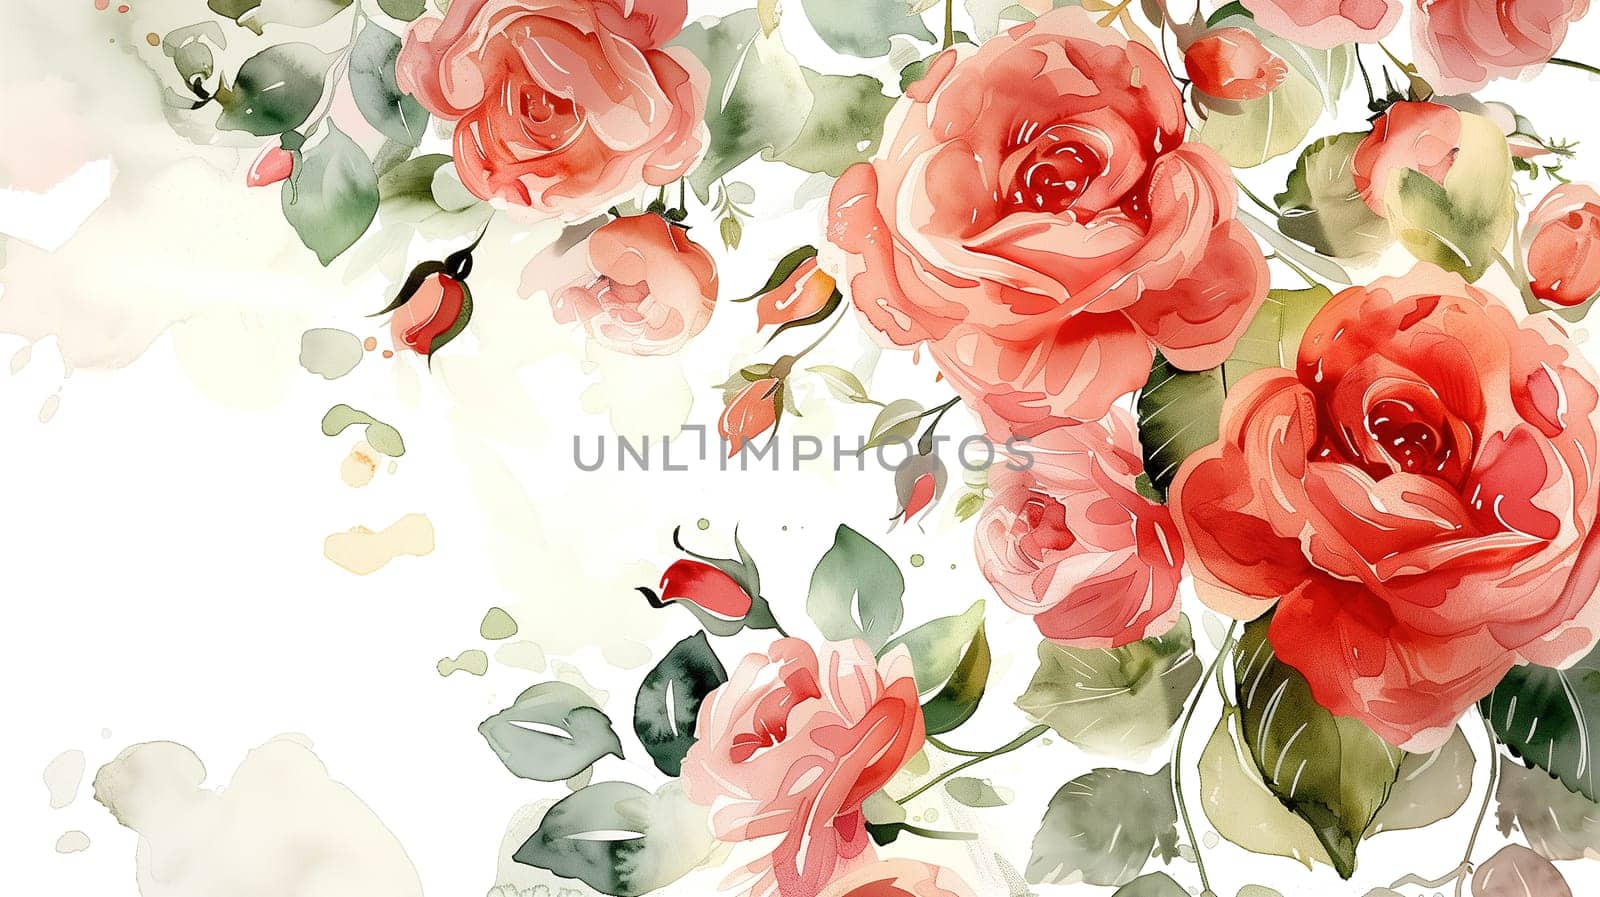 A painting depicting vibrant red roses against a clean white background. The roses are intricately detailed and realistic, adding a pop of color to the overall composition.